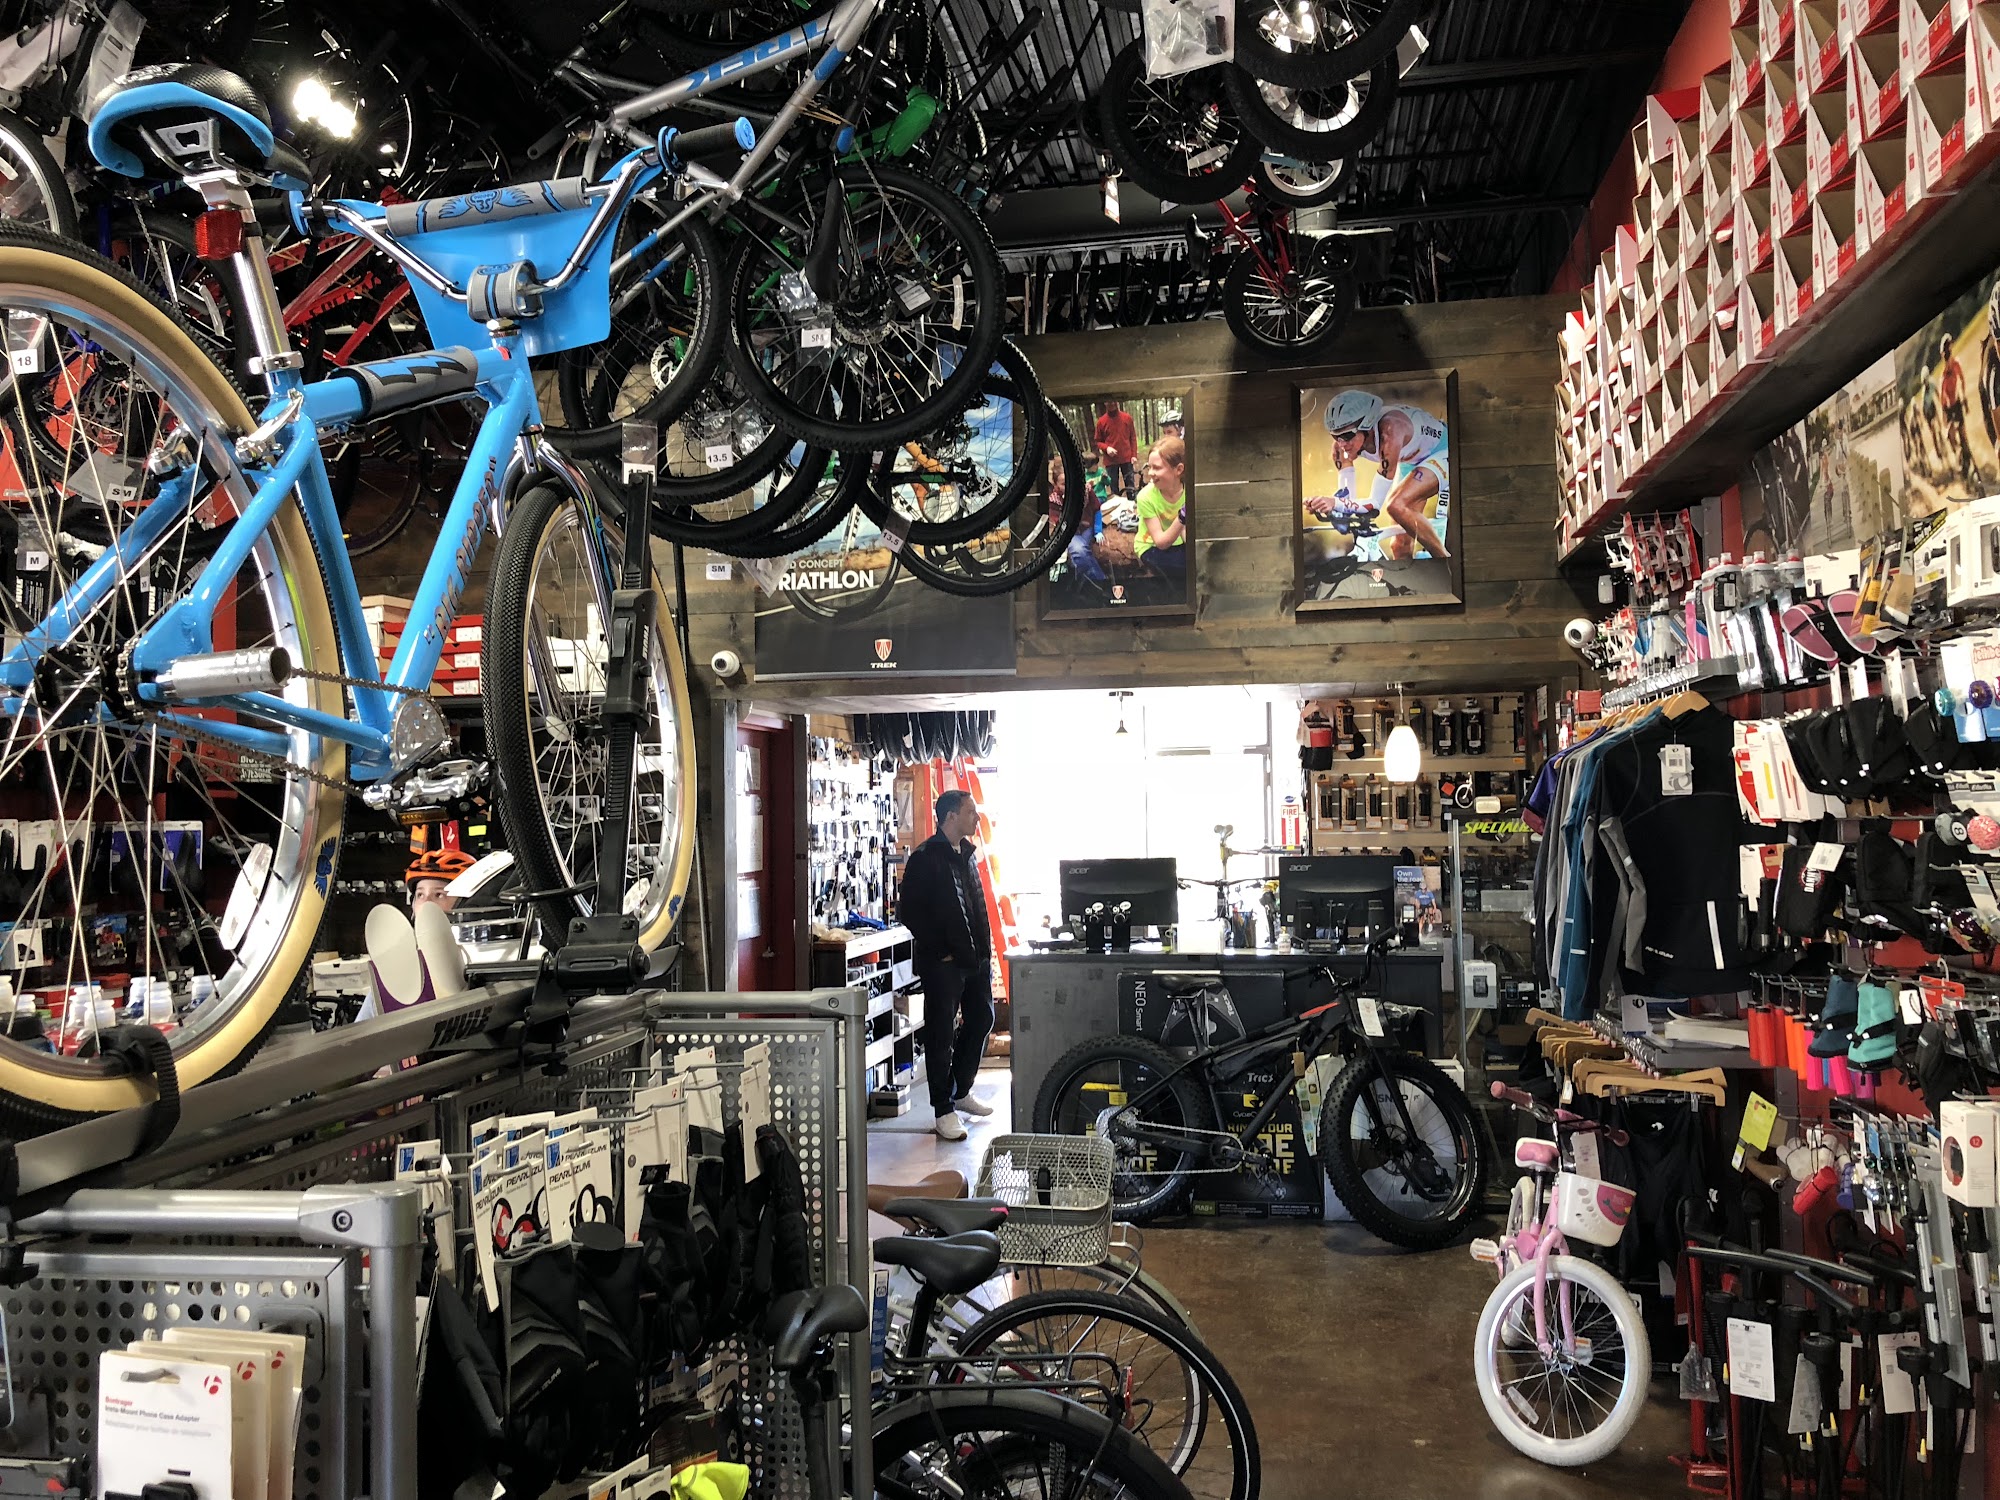 Danny's Cycles - Rye Brook